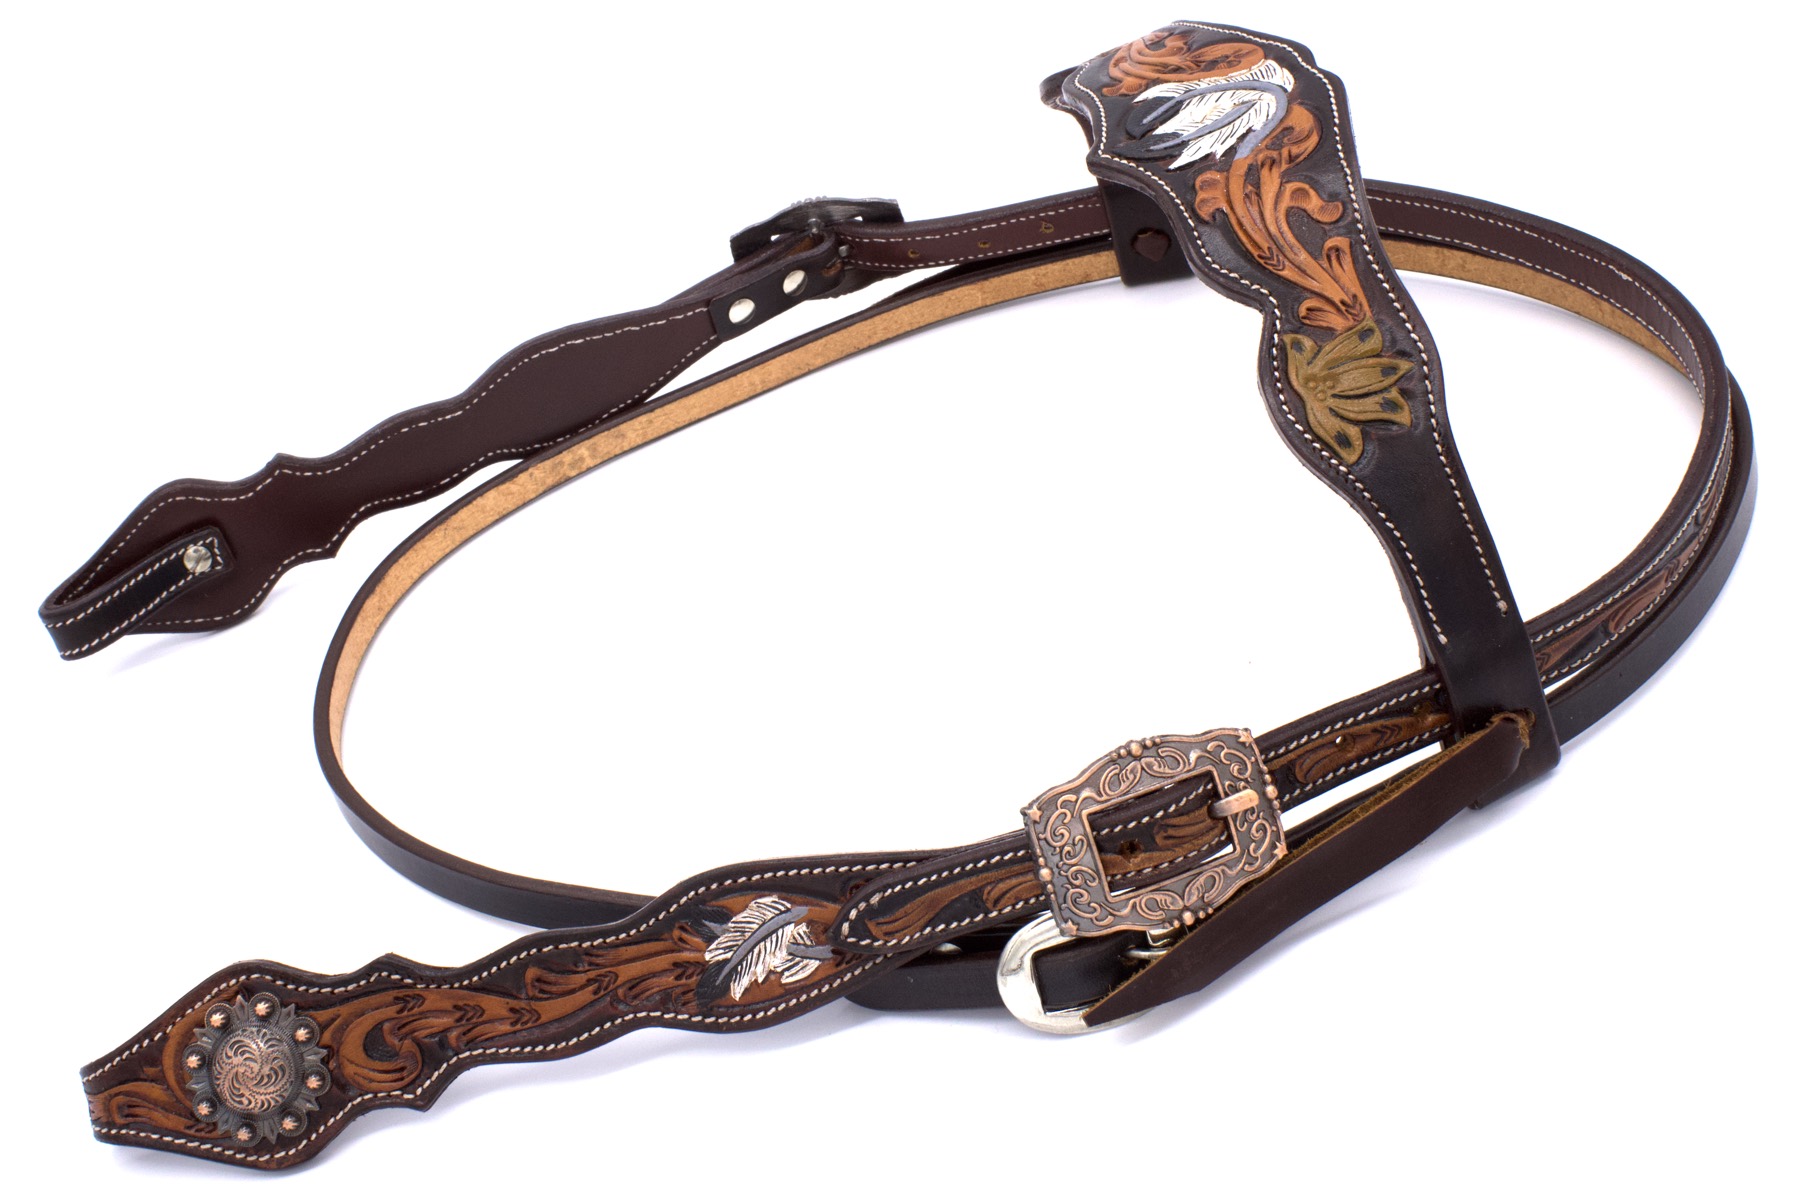 Western bridle in dark brown American leather with hallmarking and white feathers